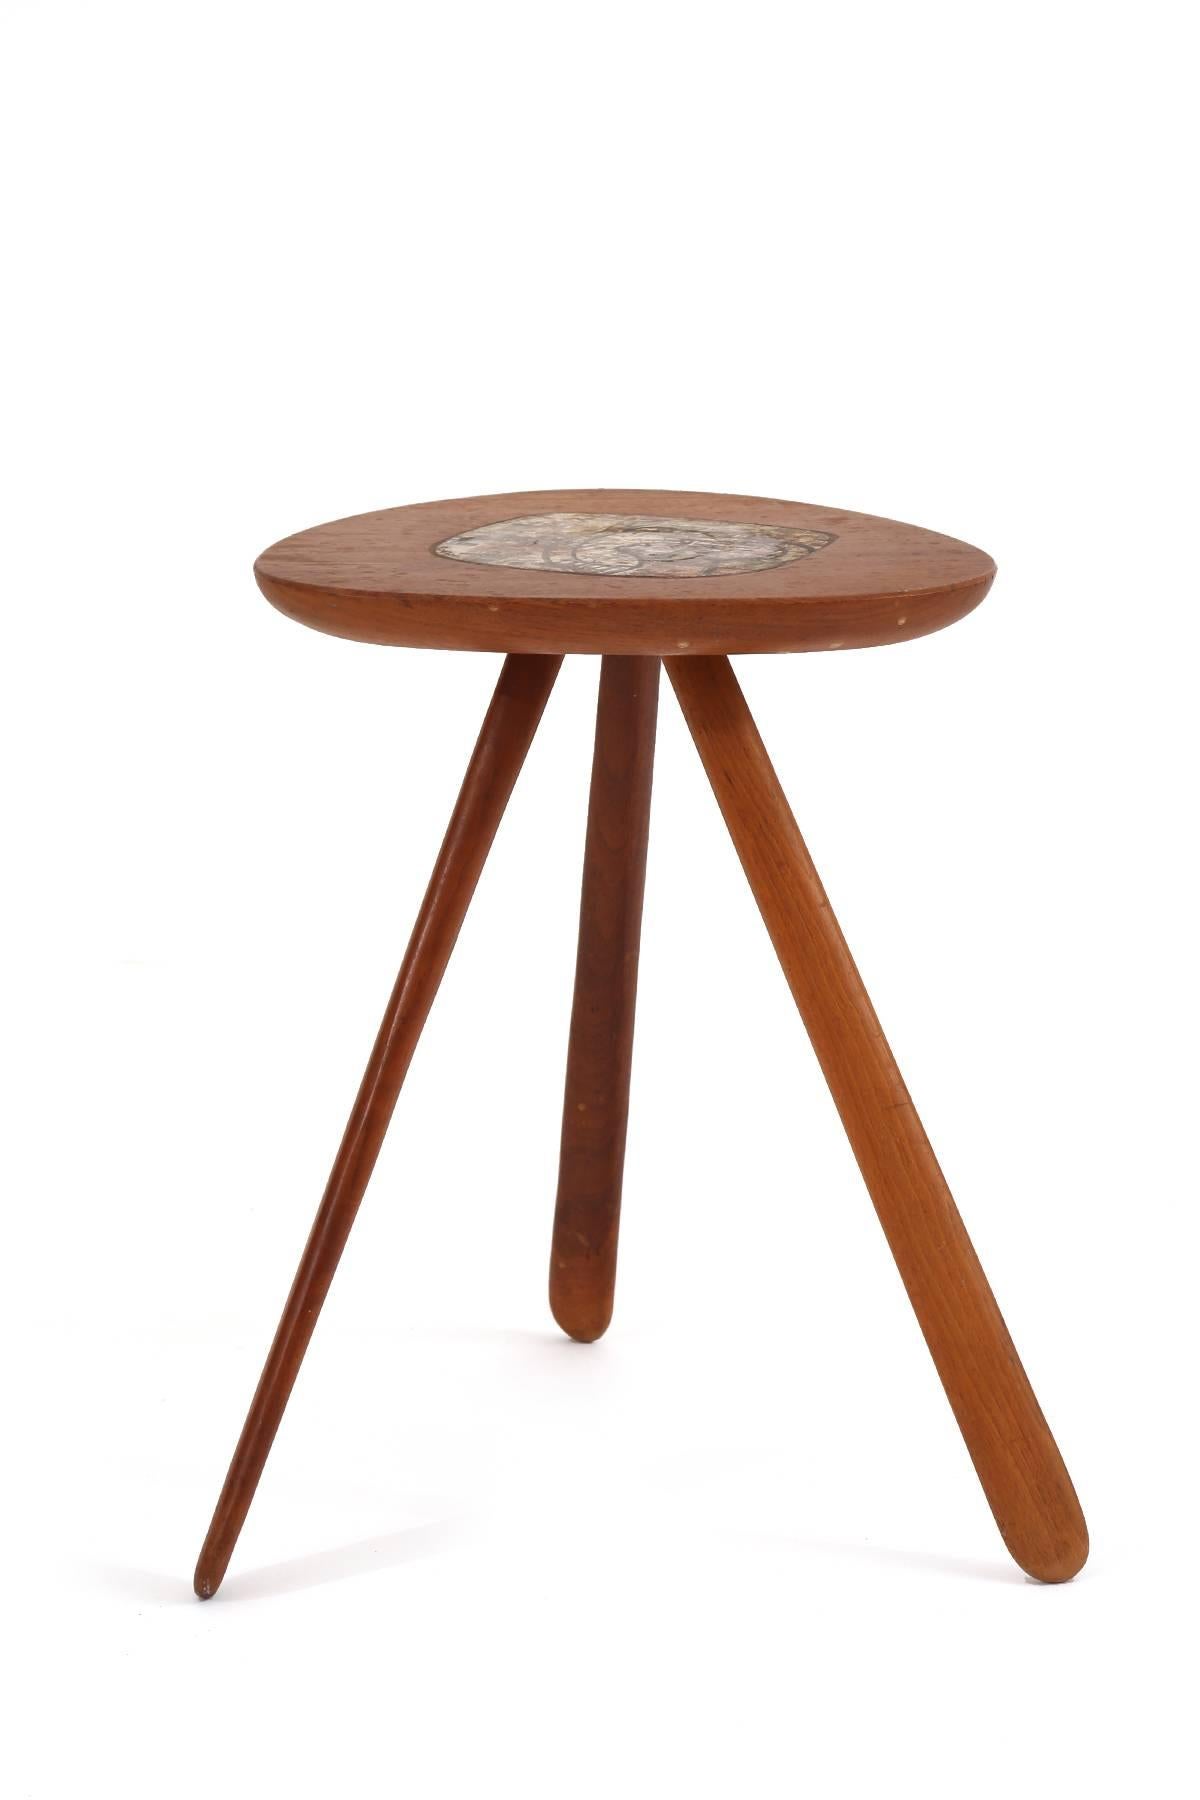 Allen Ditson and Lee Porzio solid walnut and inset ceramic tile side tables, circa late 1950s. These early examples were husband and wife collaborations. Ditson the wood and steel sculptor and craftsman fashioned the legs and top. Porzio the weaver